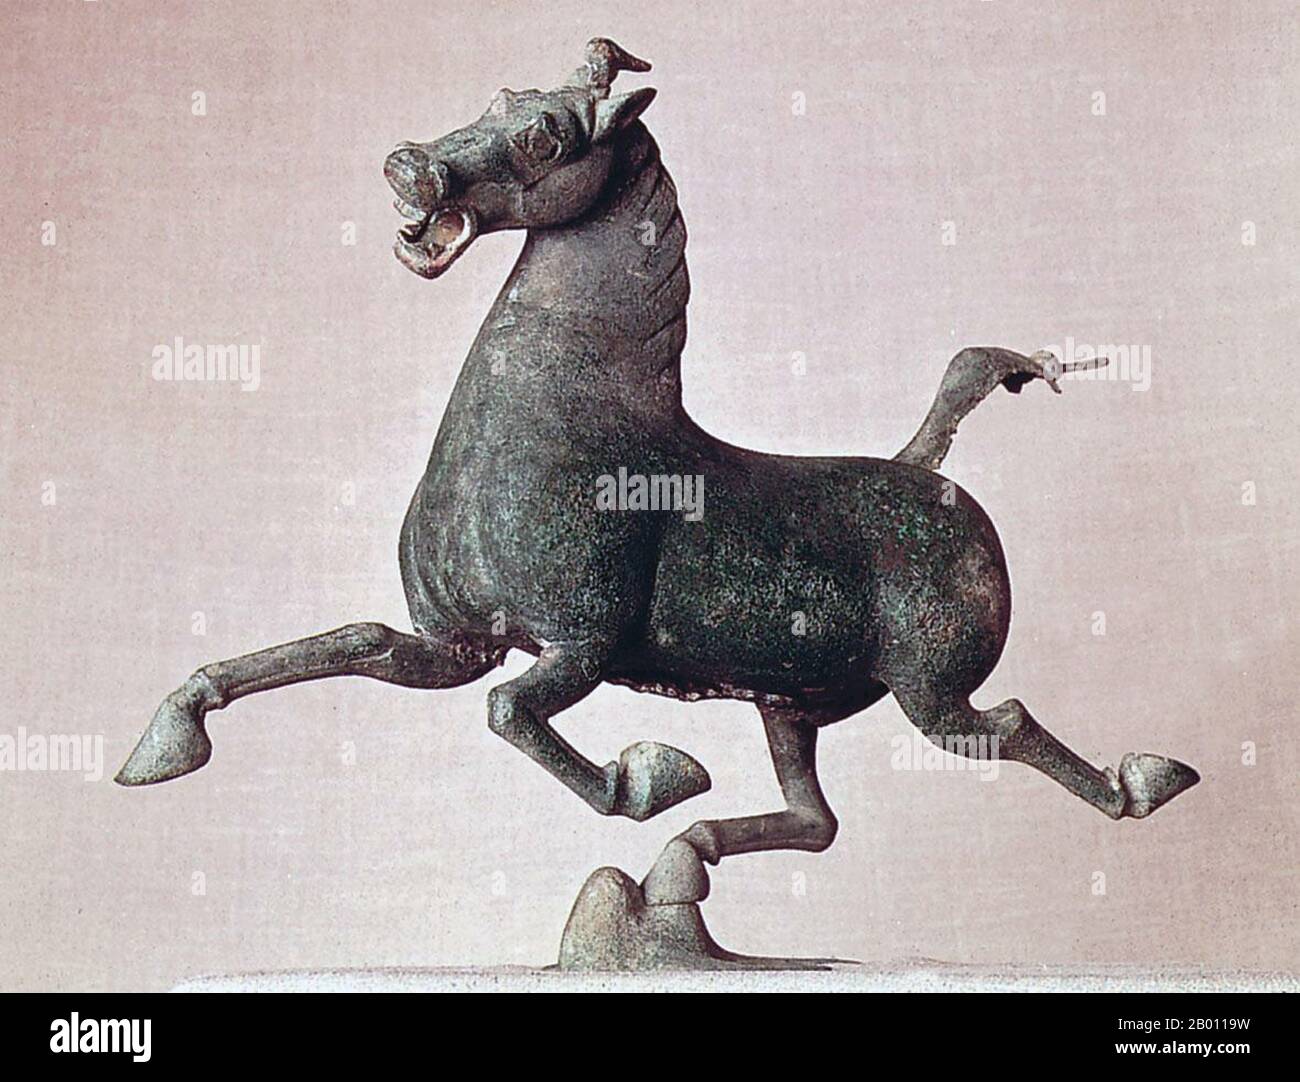 China: The Flying Horse of Gansu, 2nd century CE.  The Flying Horse of Gansu, also known as the Bronze Running Horse or the Galloping Horse Treading on a Flying Swallow, is a bronze sculpture from the tomb of General Zhang, Leitai, Wuwei County, Gansu province, 2nd century CE, Eastern Han Dynasty. Stock Photo